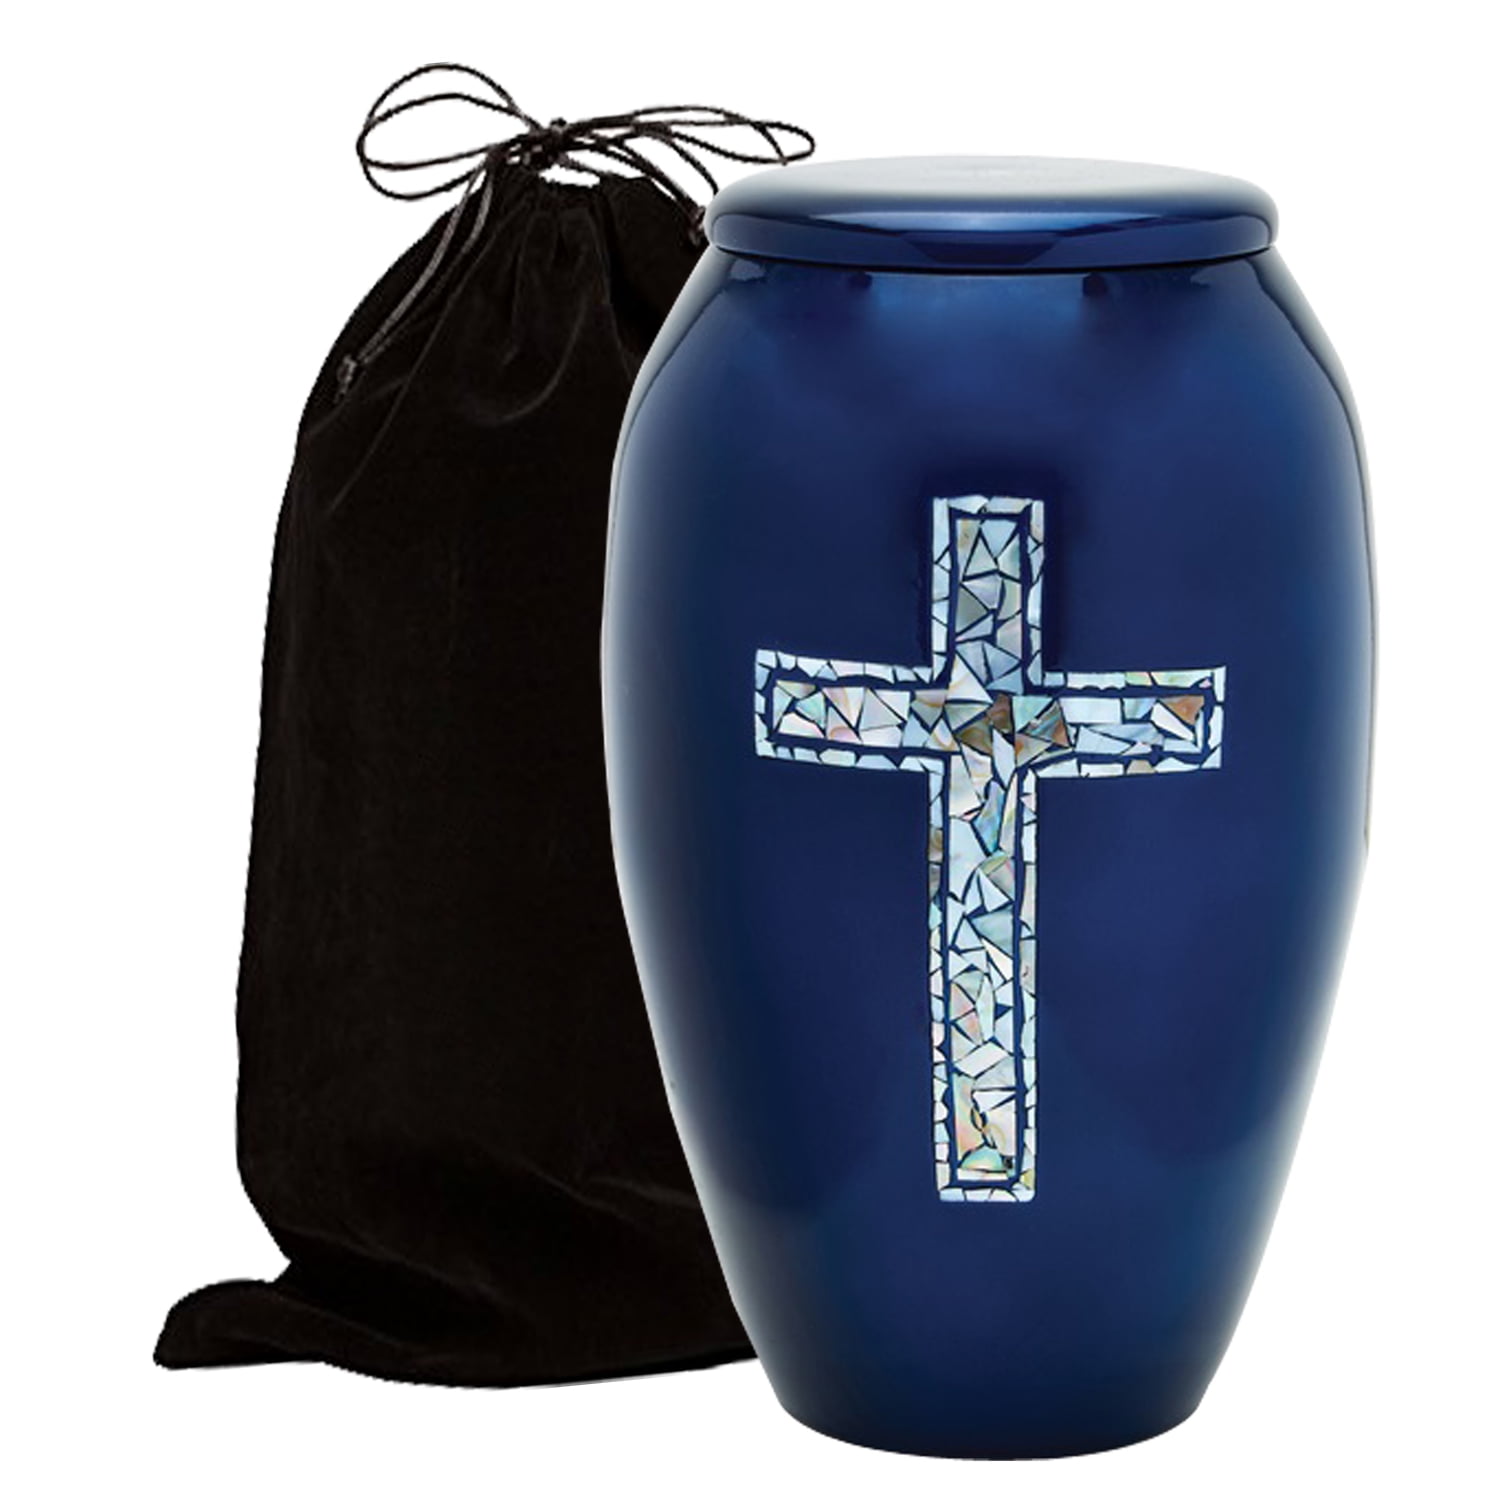 Mother of Pearl Inlaid Metal Cremation Urn MOP Cremation Urn Great Urn Deal with Free Bag Blue Anchor Handcrafted Adult Funeral Urn for Ashes Solid Metal Funeral Urn